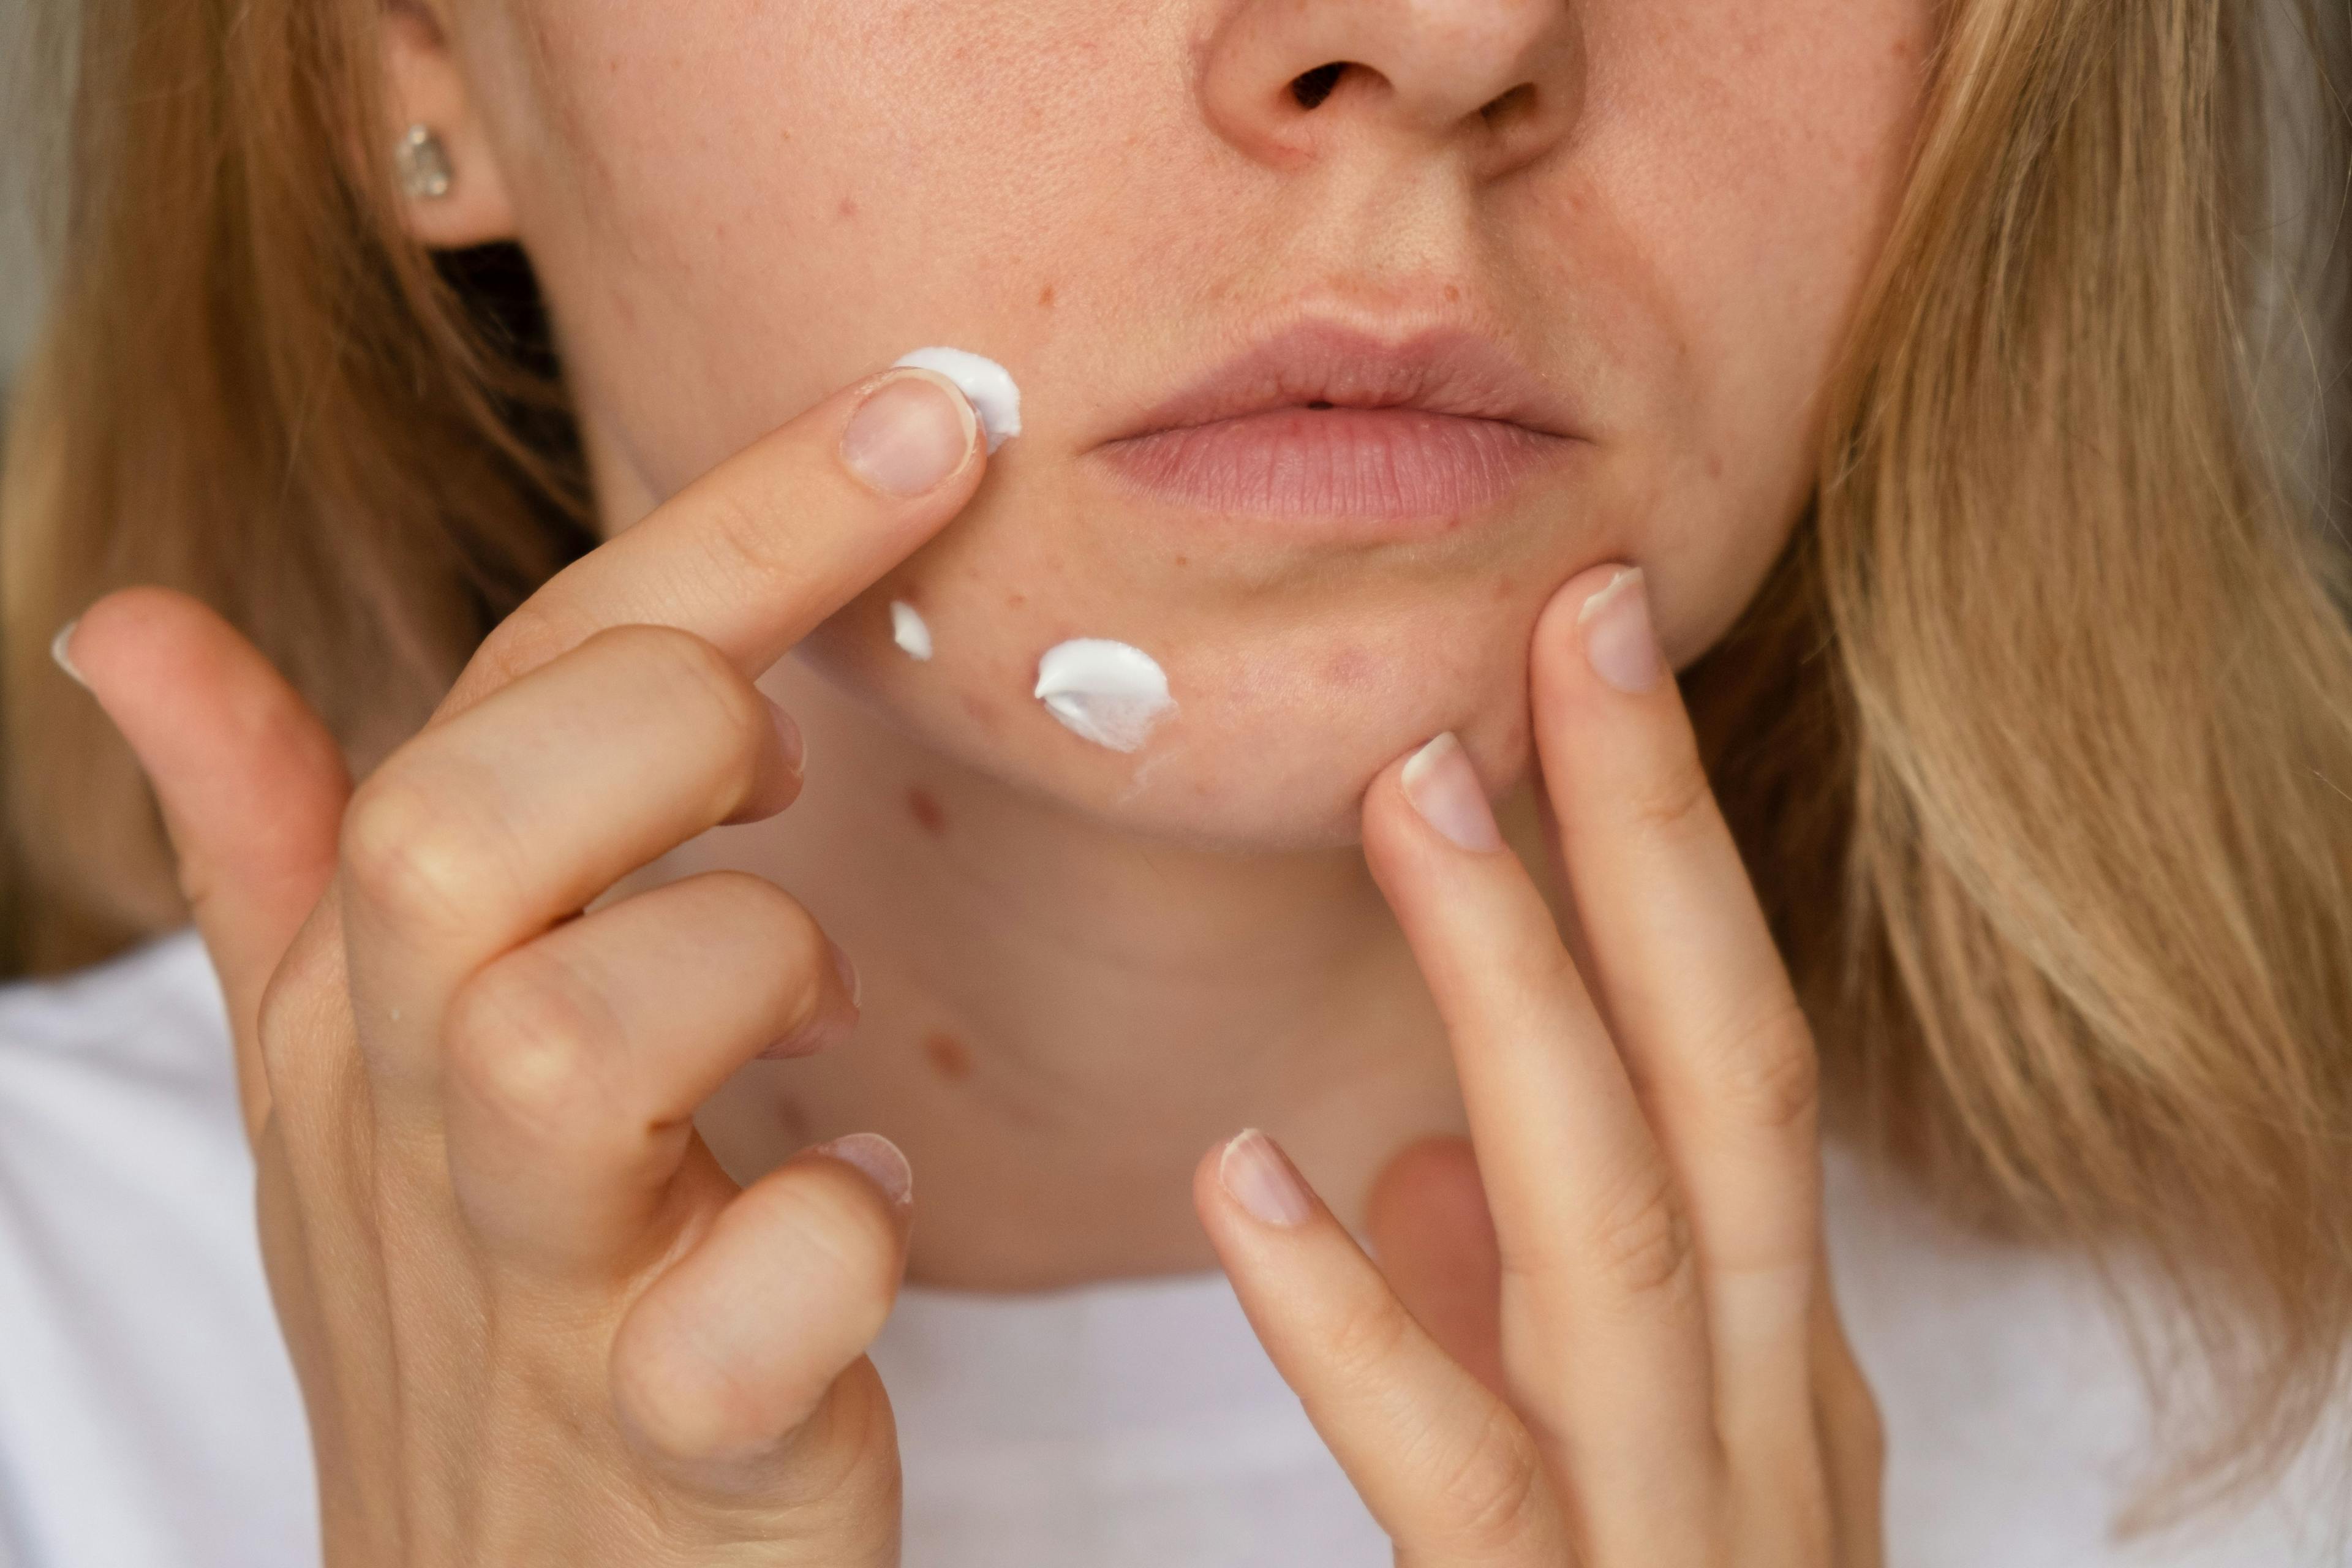 Examining the State of Benzoyl Peroxide-Containing Acne Products After Benzene Contamination